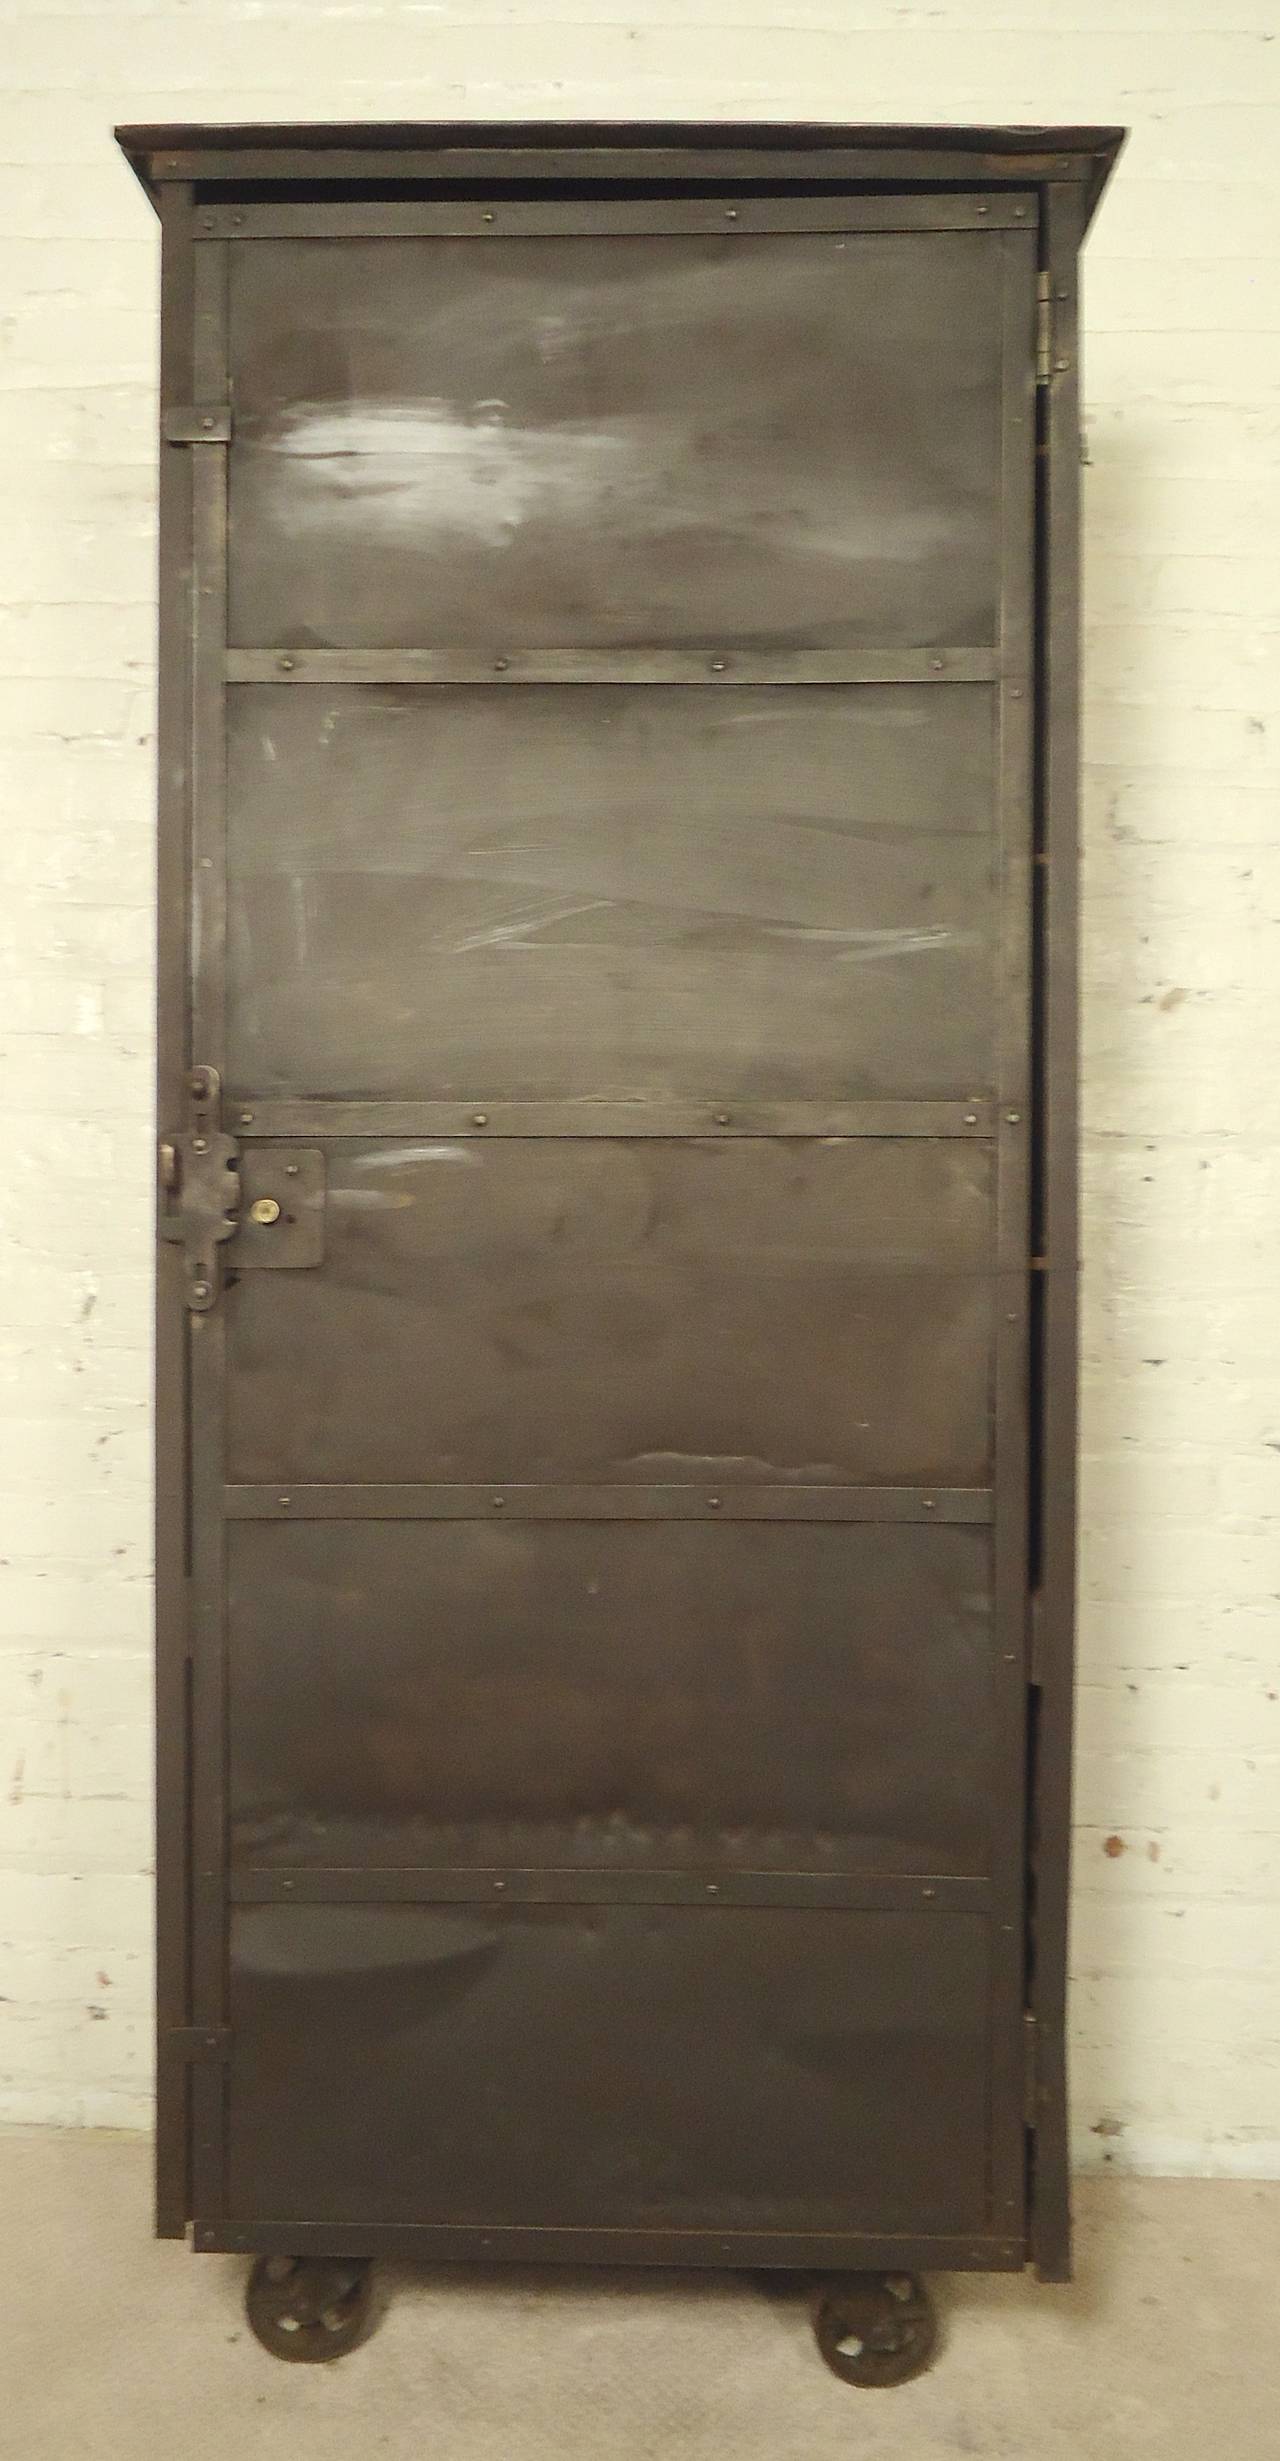 Unusual tall cabinet with industrial factory style. Set on large casters, substantial cabinet space, latching door.

(Please confirm item location - NY or NJ - with dealer)